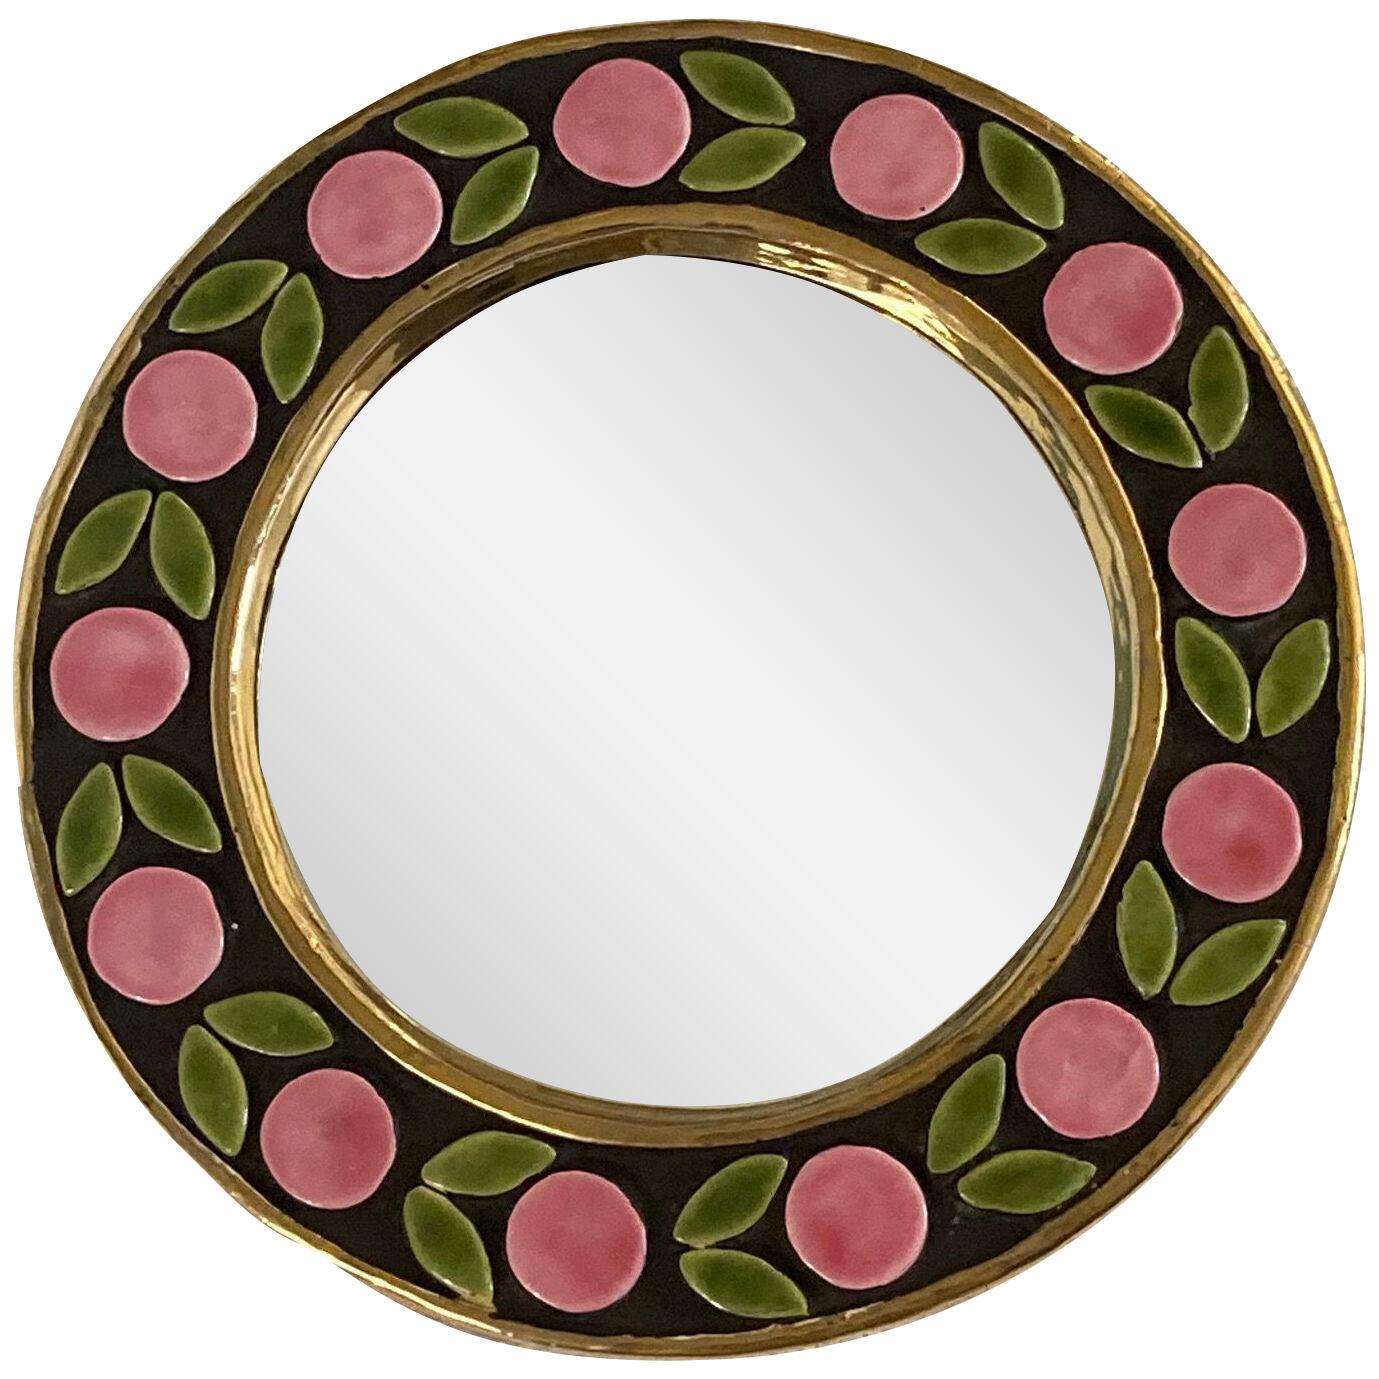 Ceramic Wall Mirror with Fruits and Leave Motif 'circa 1960s', by Mithé Espelt